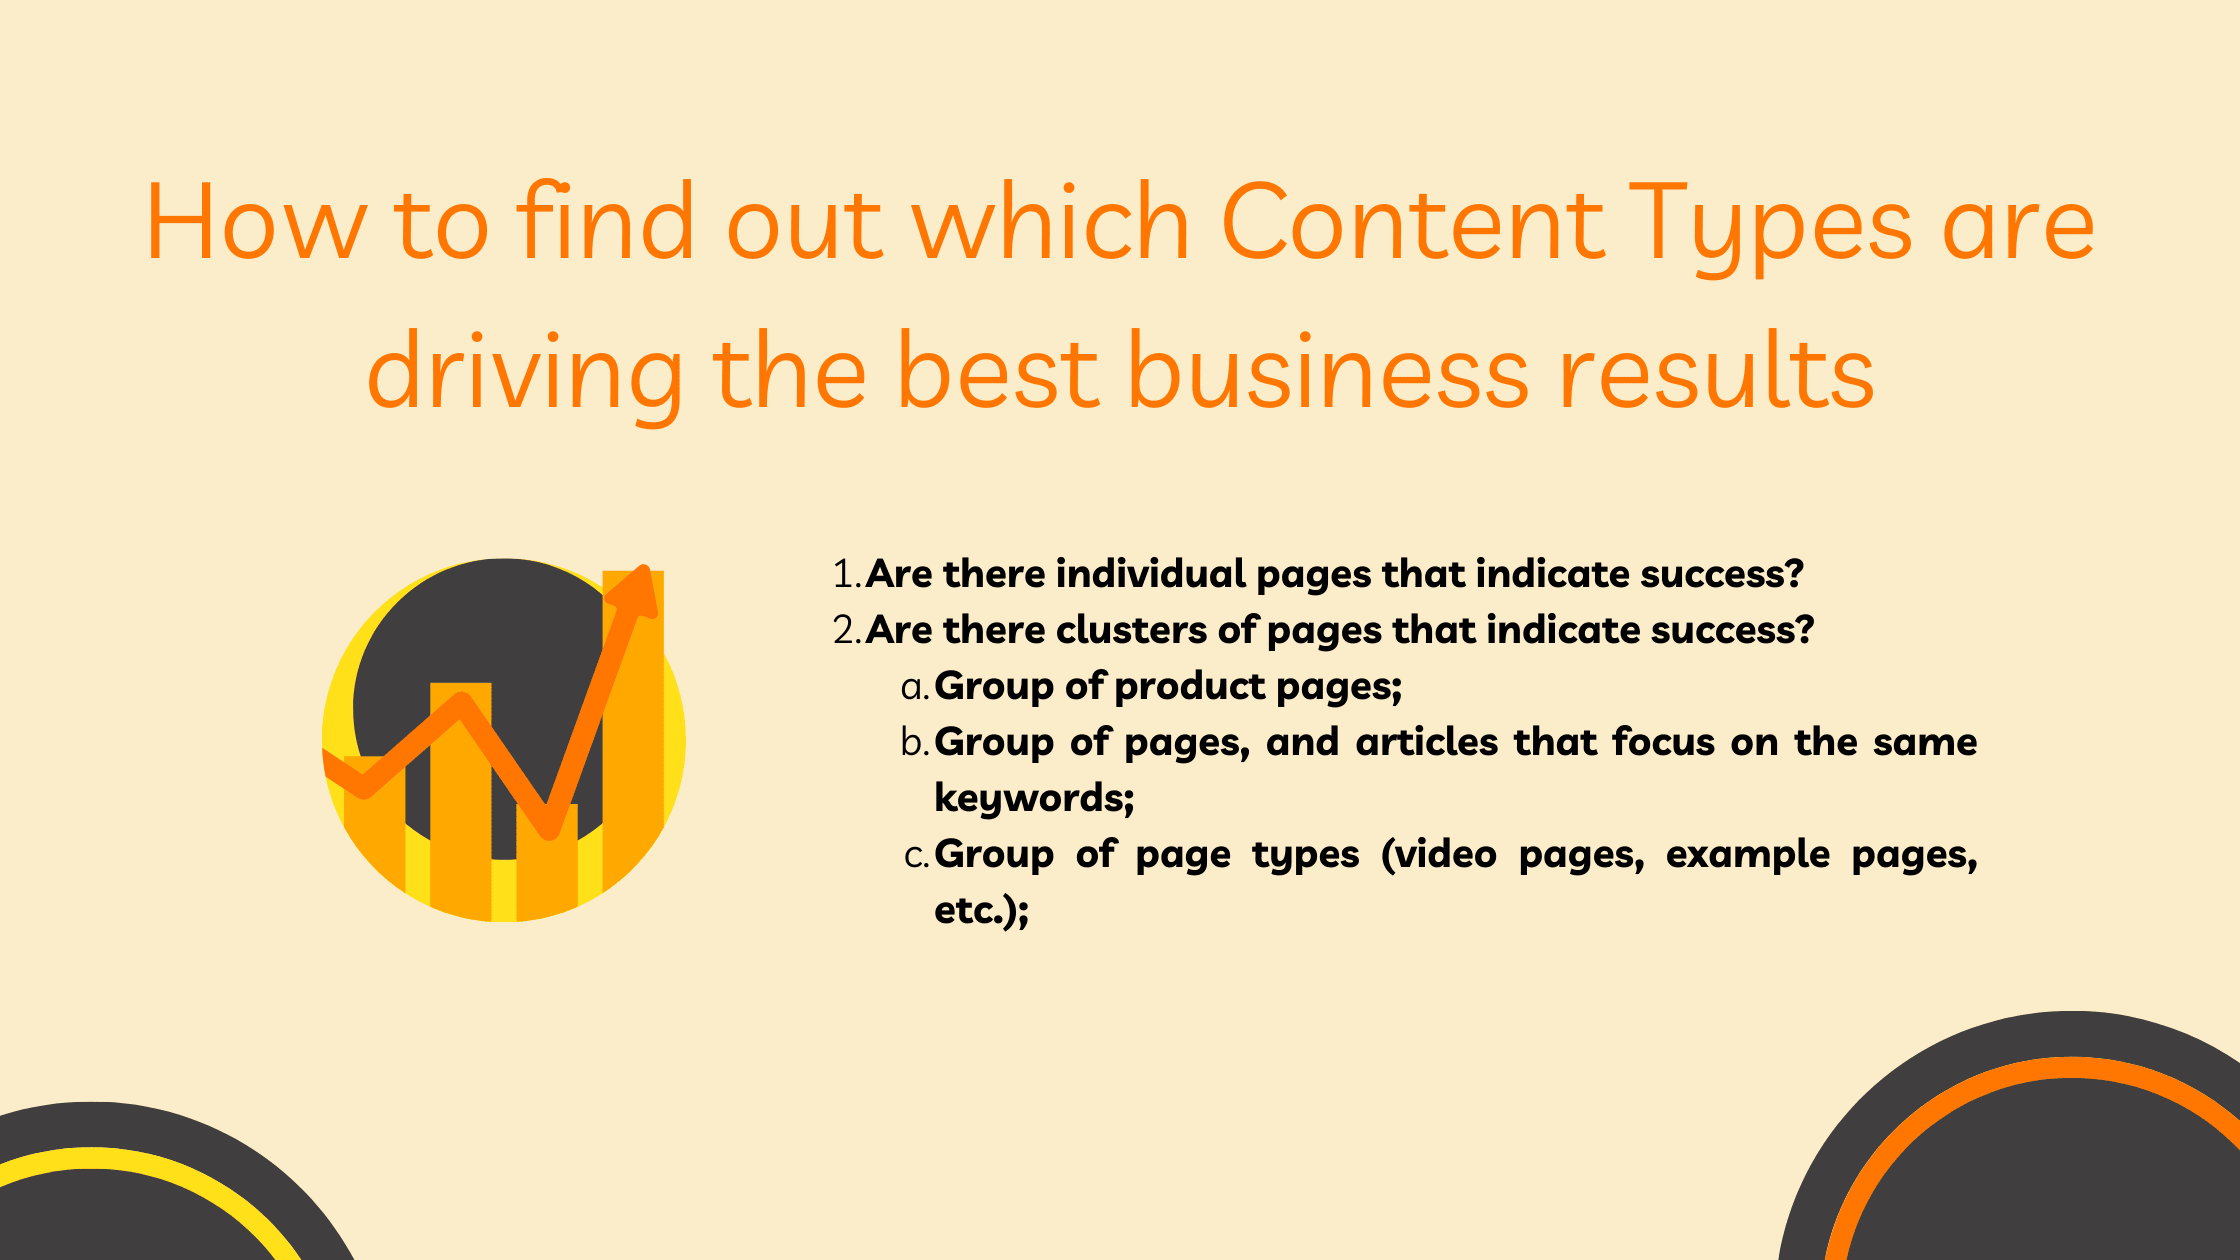 How to find out which Content Types are driving the best business results